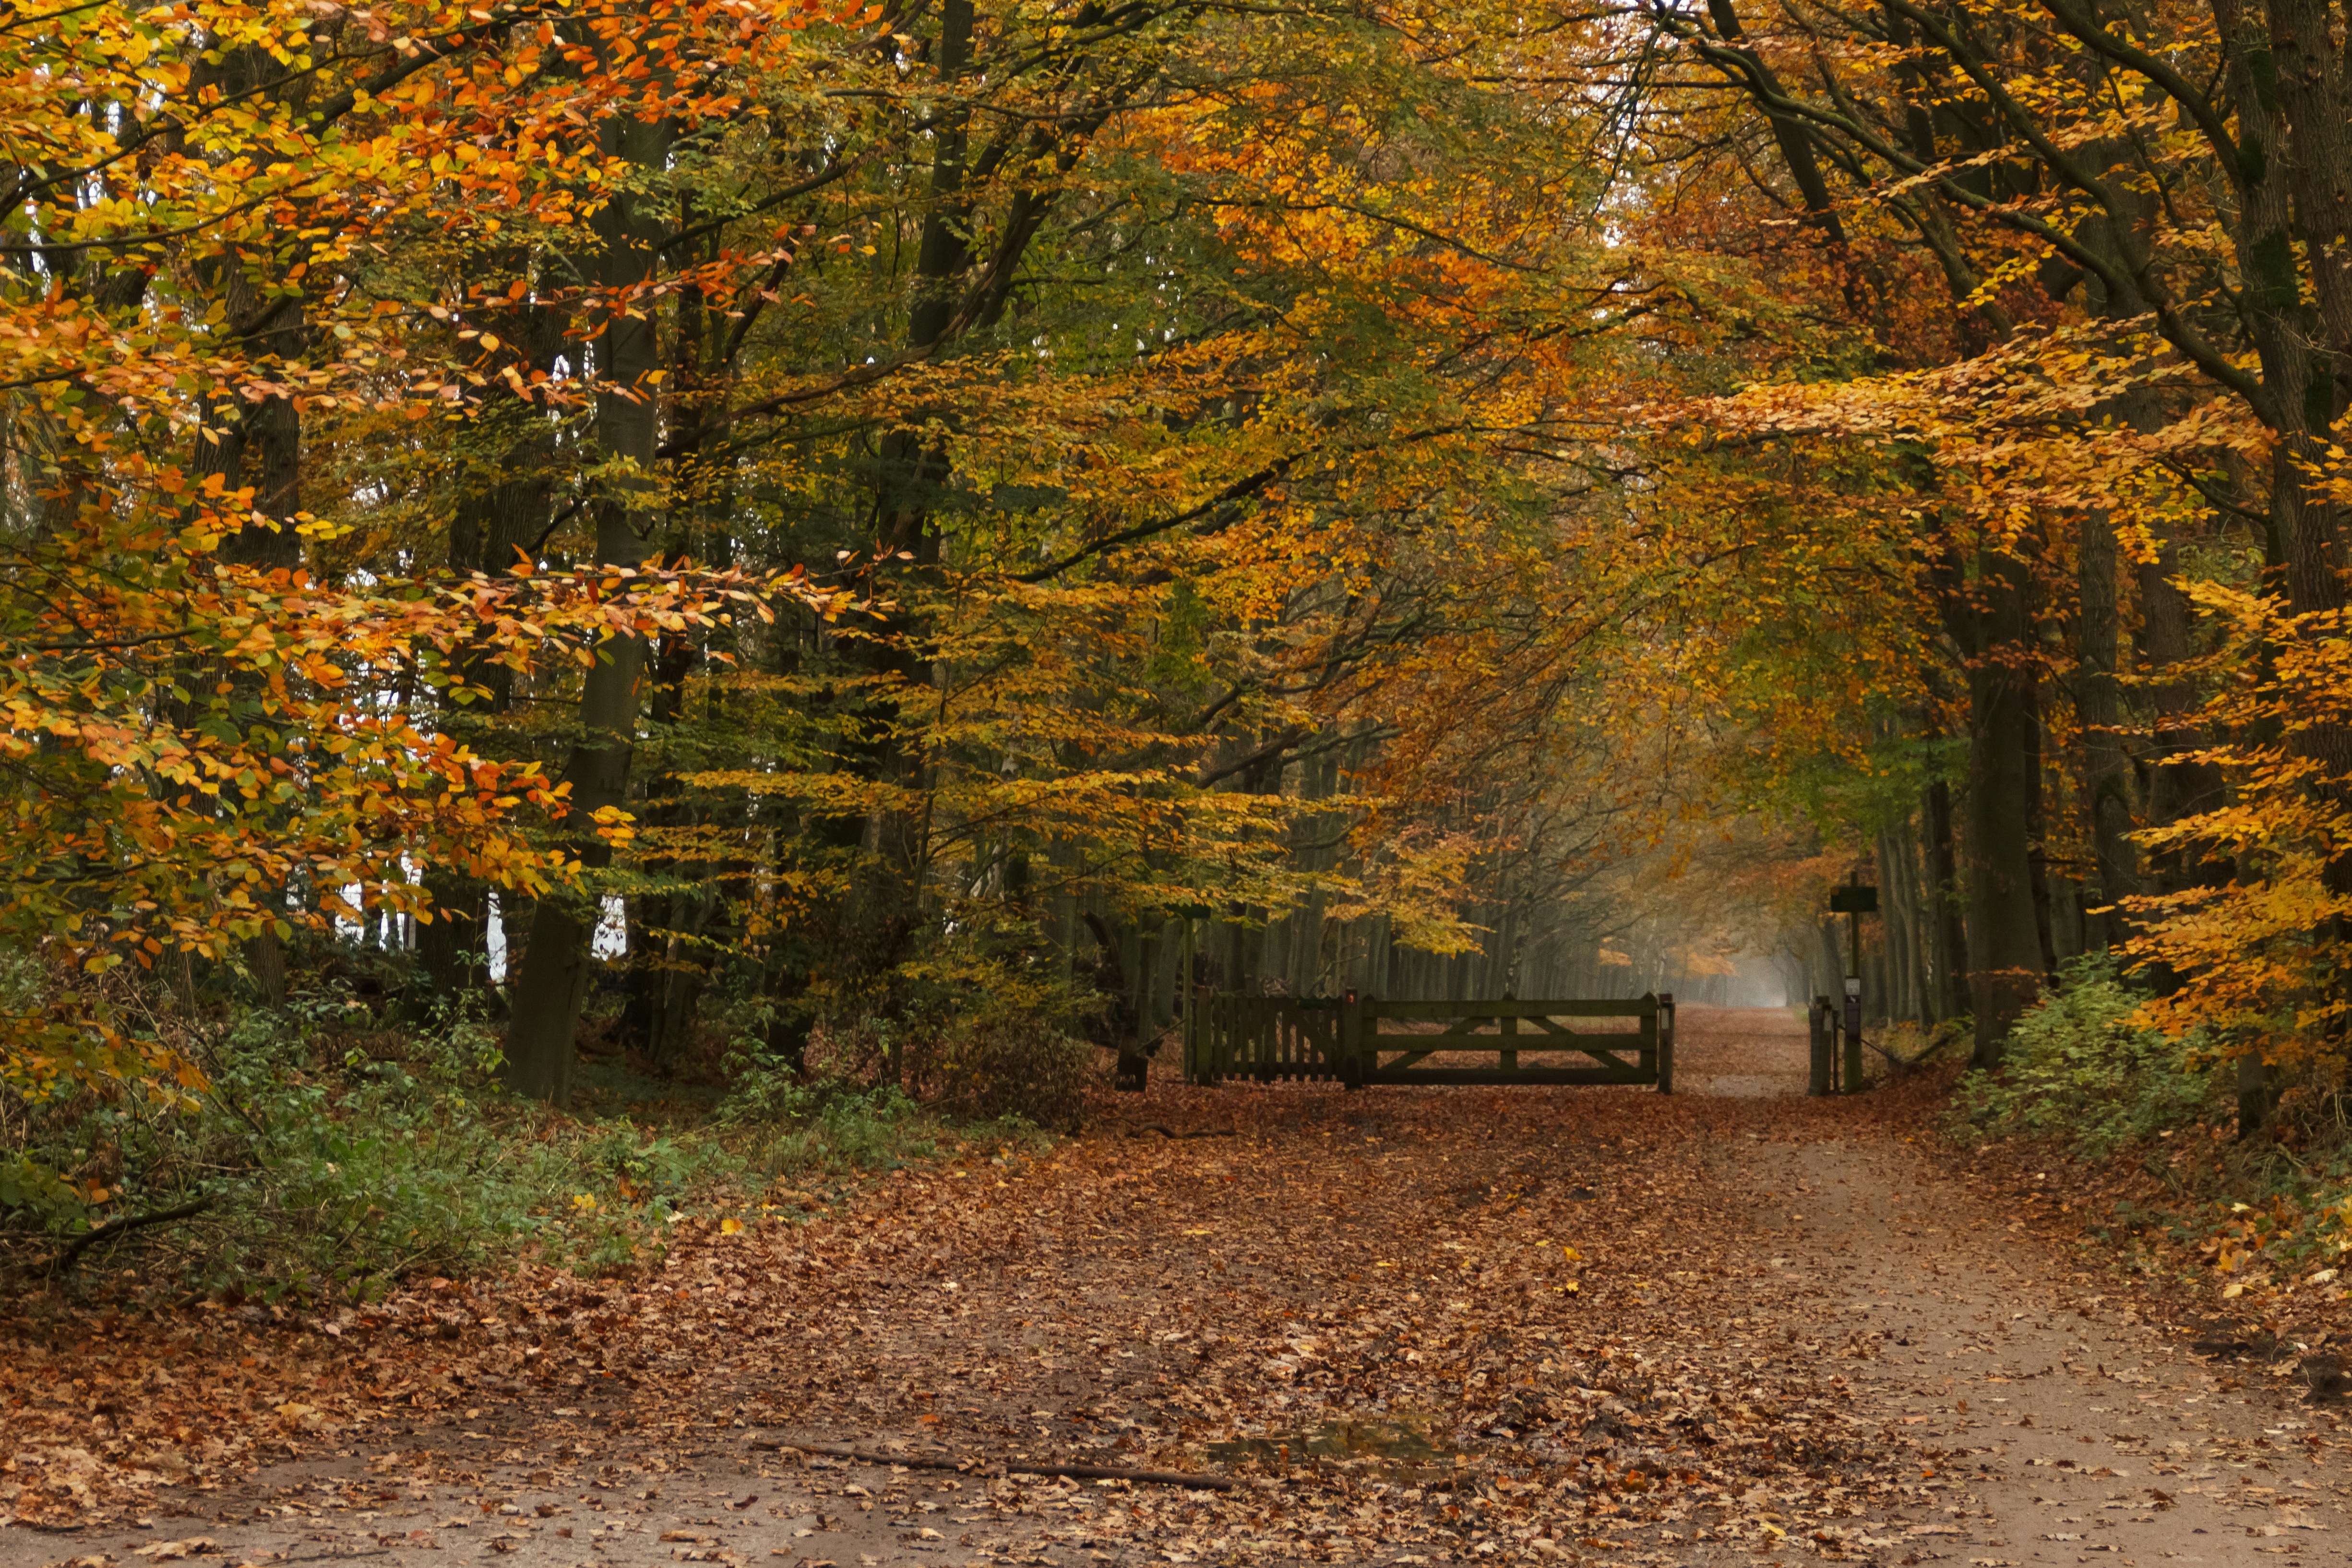 Lane and wooden gate in autumn woods. Fall has coloured the leaves of the trees in warm golden, orange and yellow colours. Goois Nature Reserve, Bussum, the Netherlands.